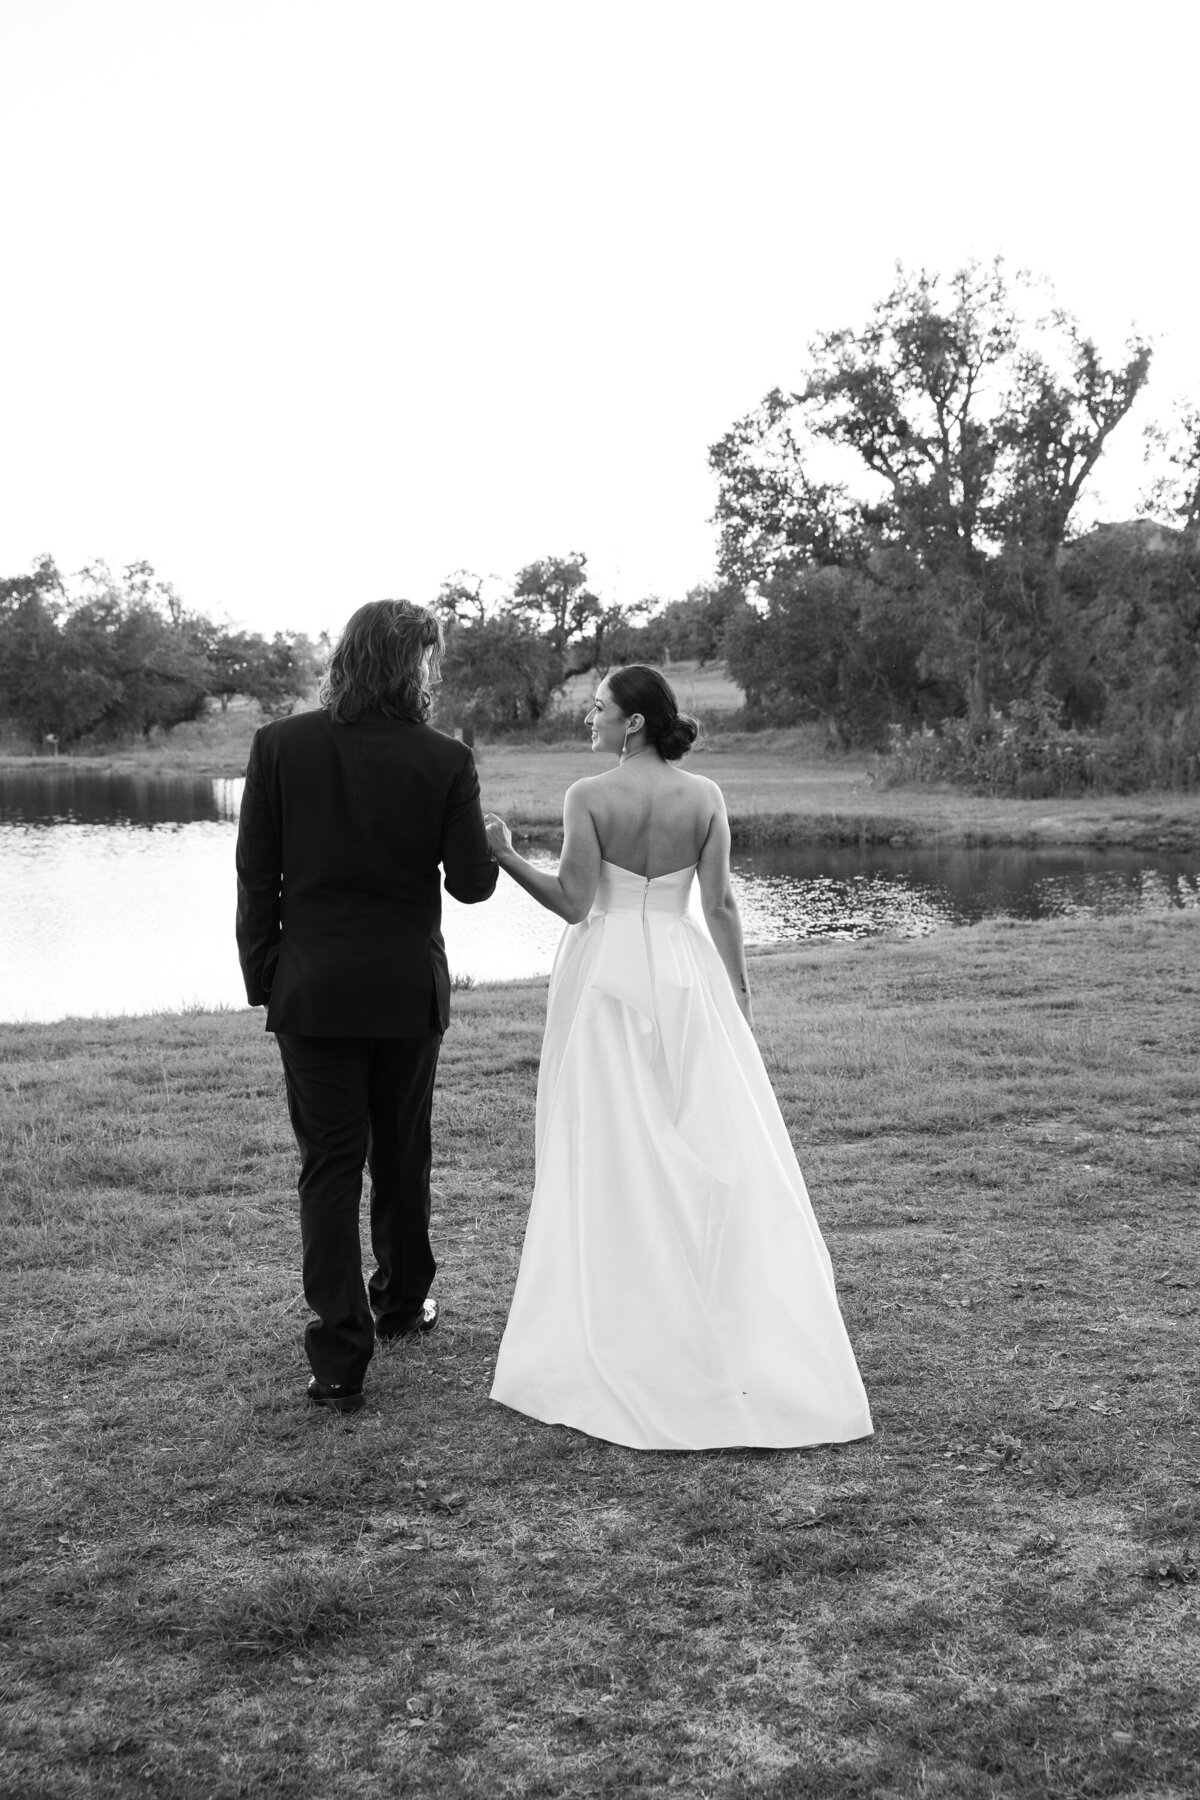 An Austin wedding photographer captures the serene moment of a bride and groom walking in front of a picturesque pond.